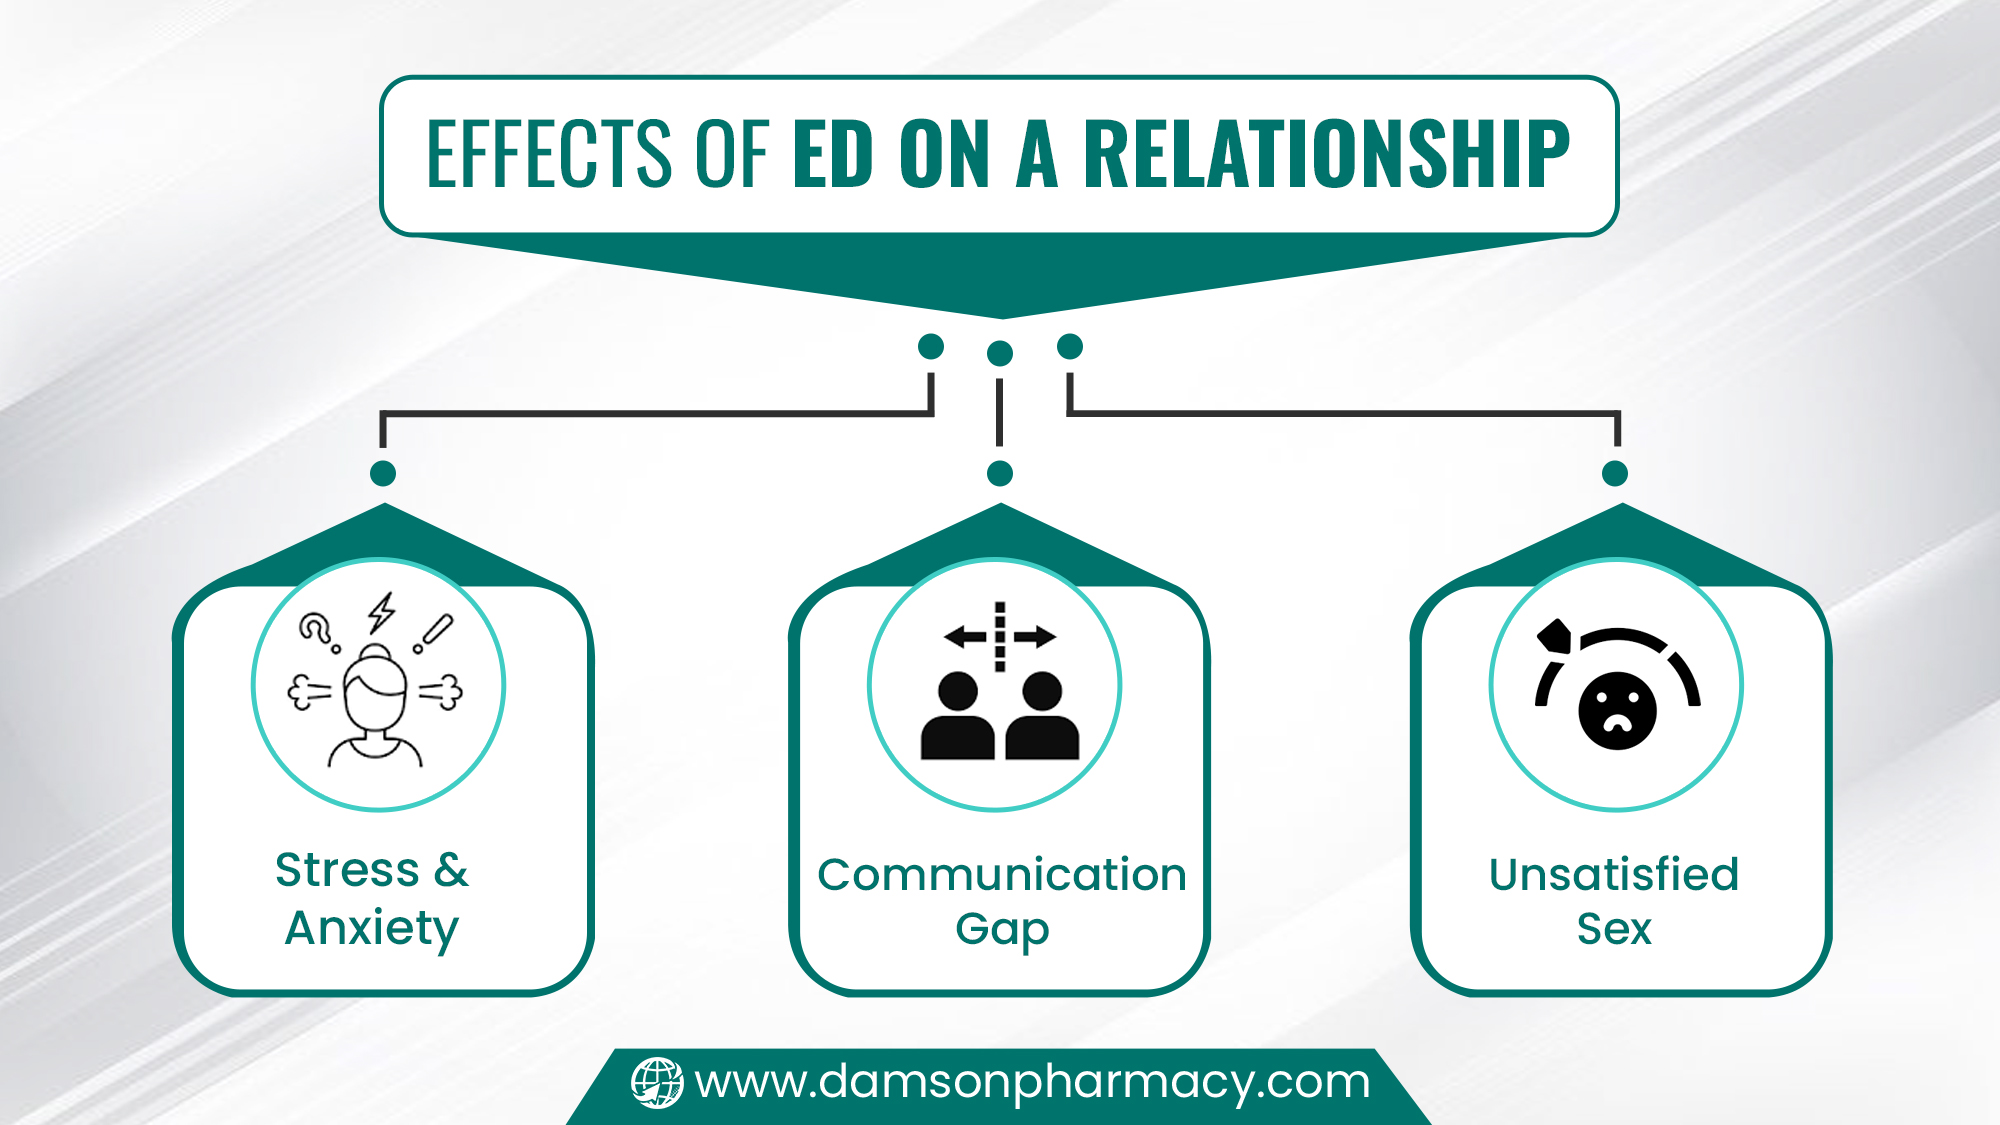 Effects of ED on a Relationship